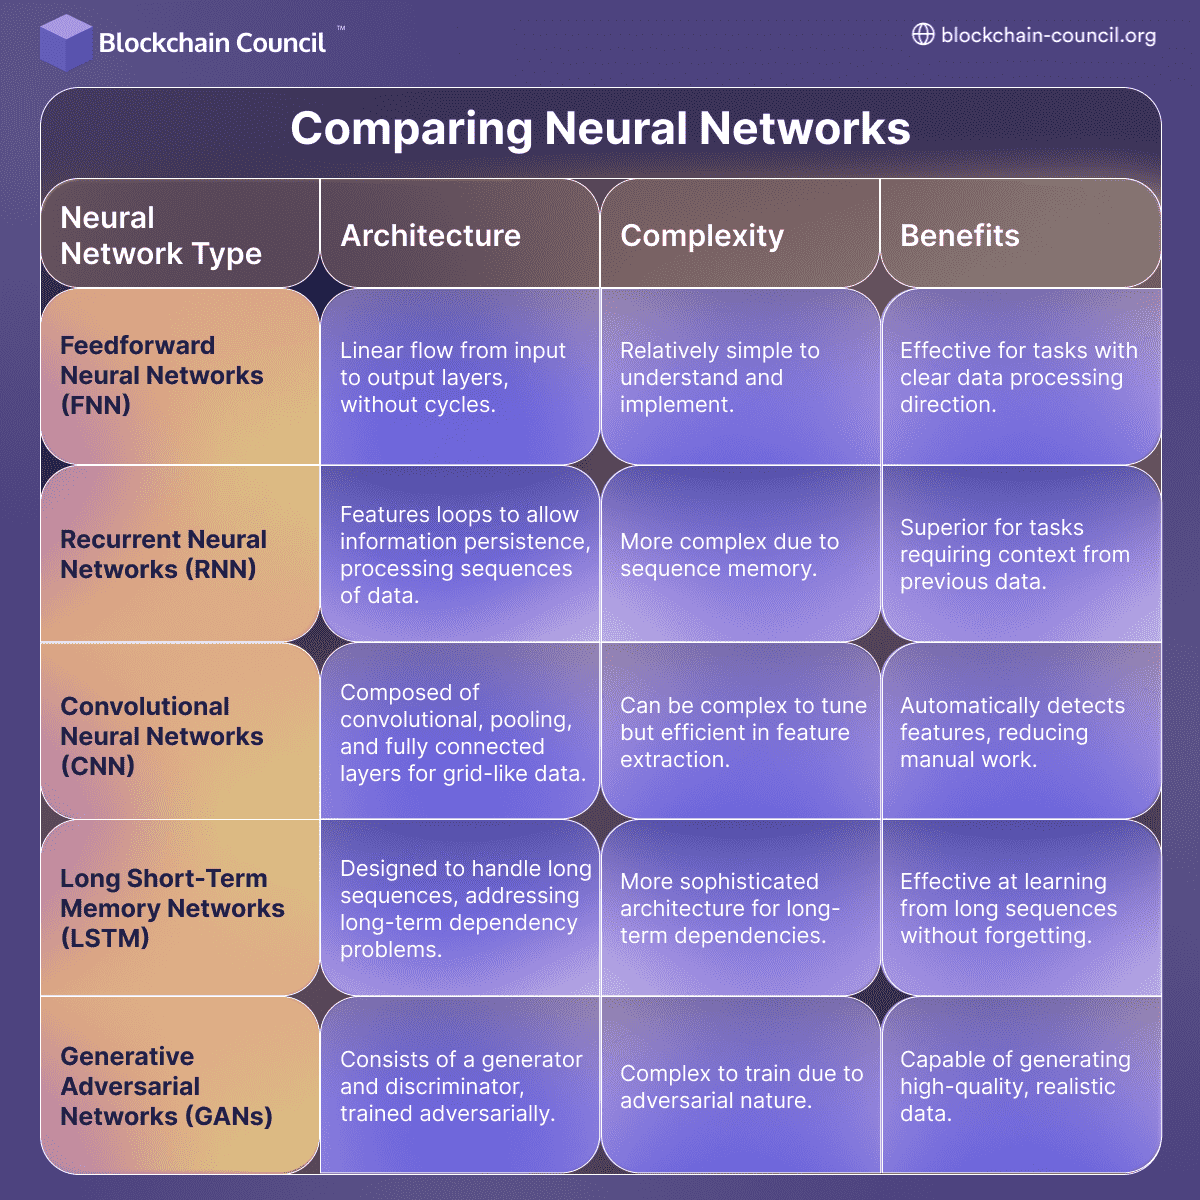 Comparing Neural Networks